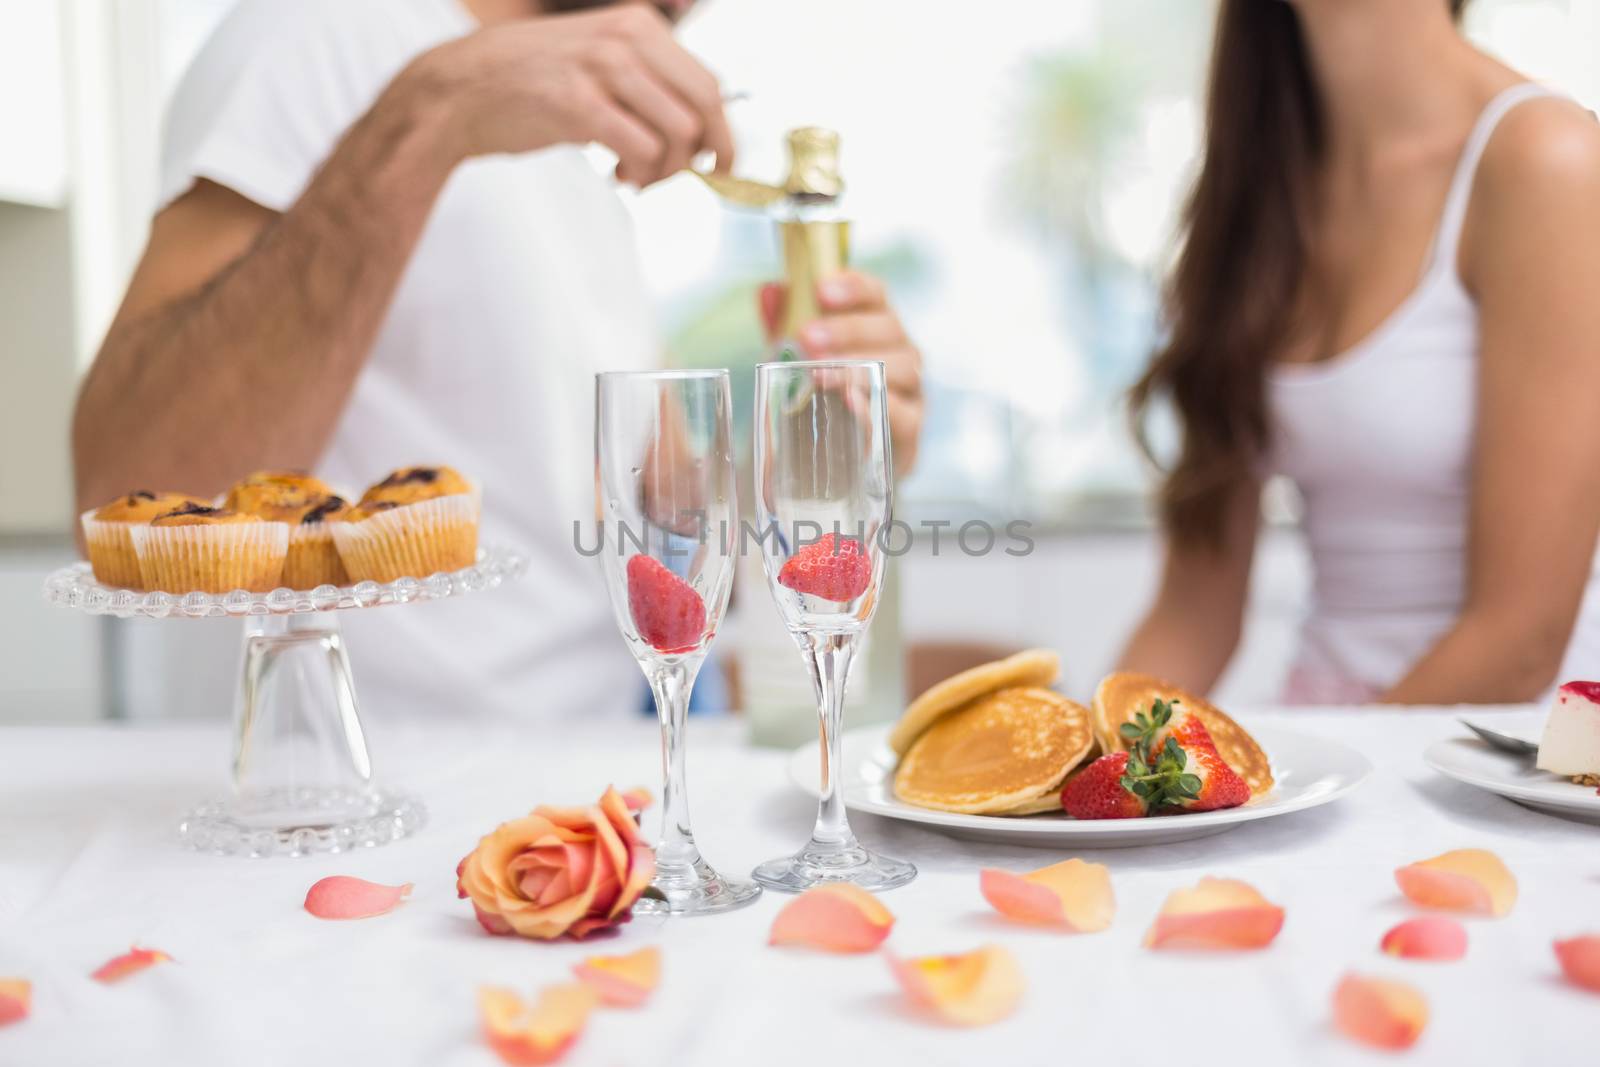 Young couple having a romantic breakfast at home in the kitchen